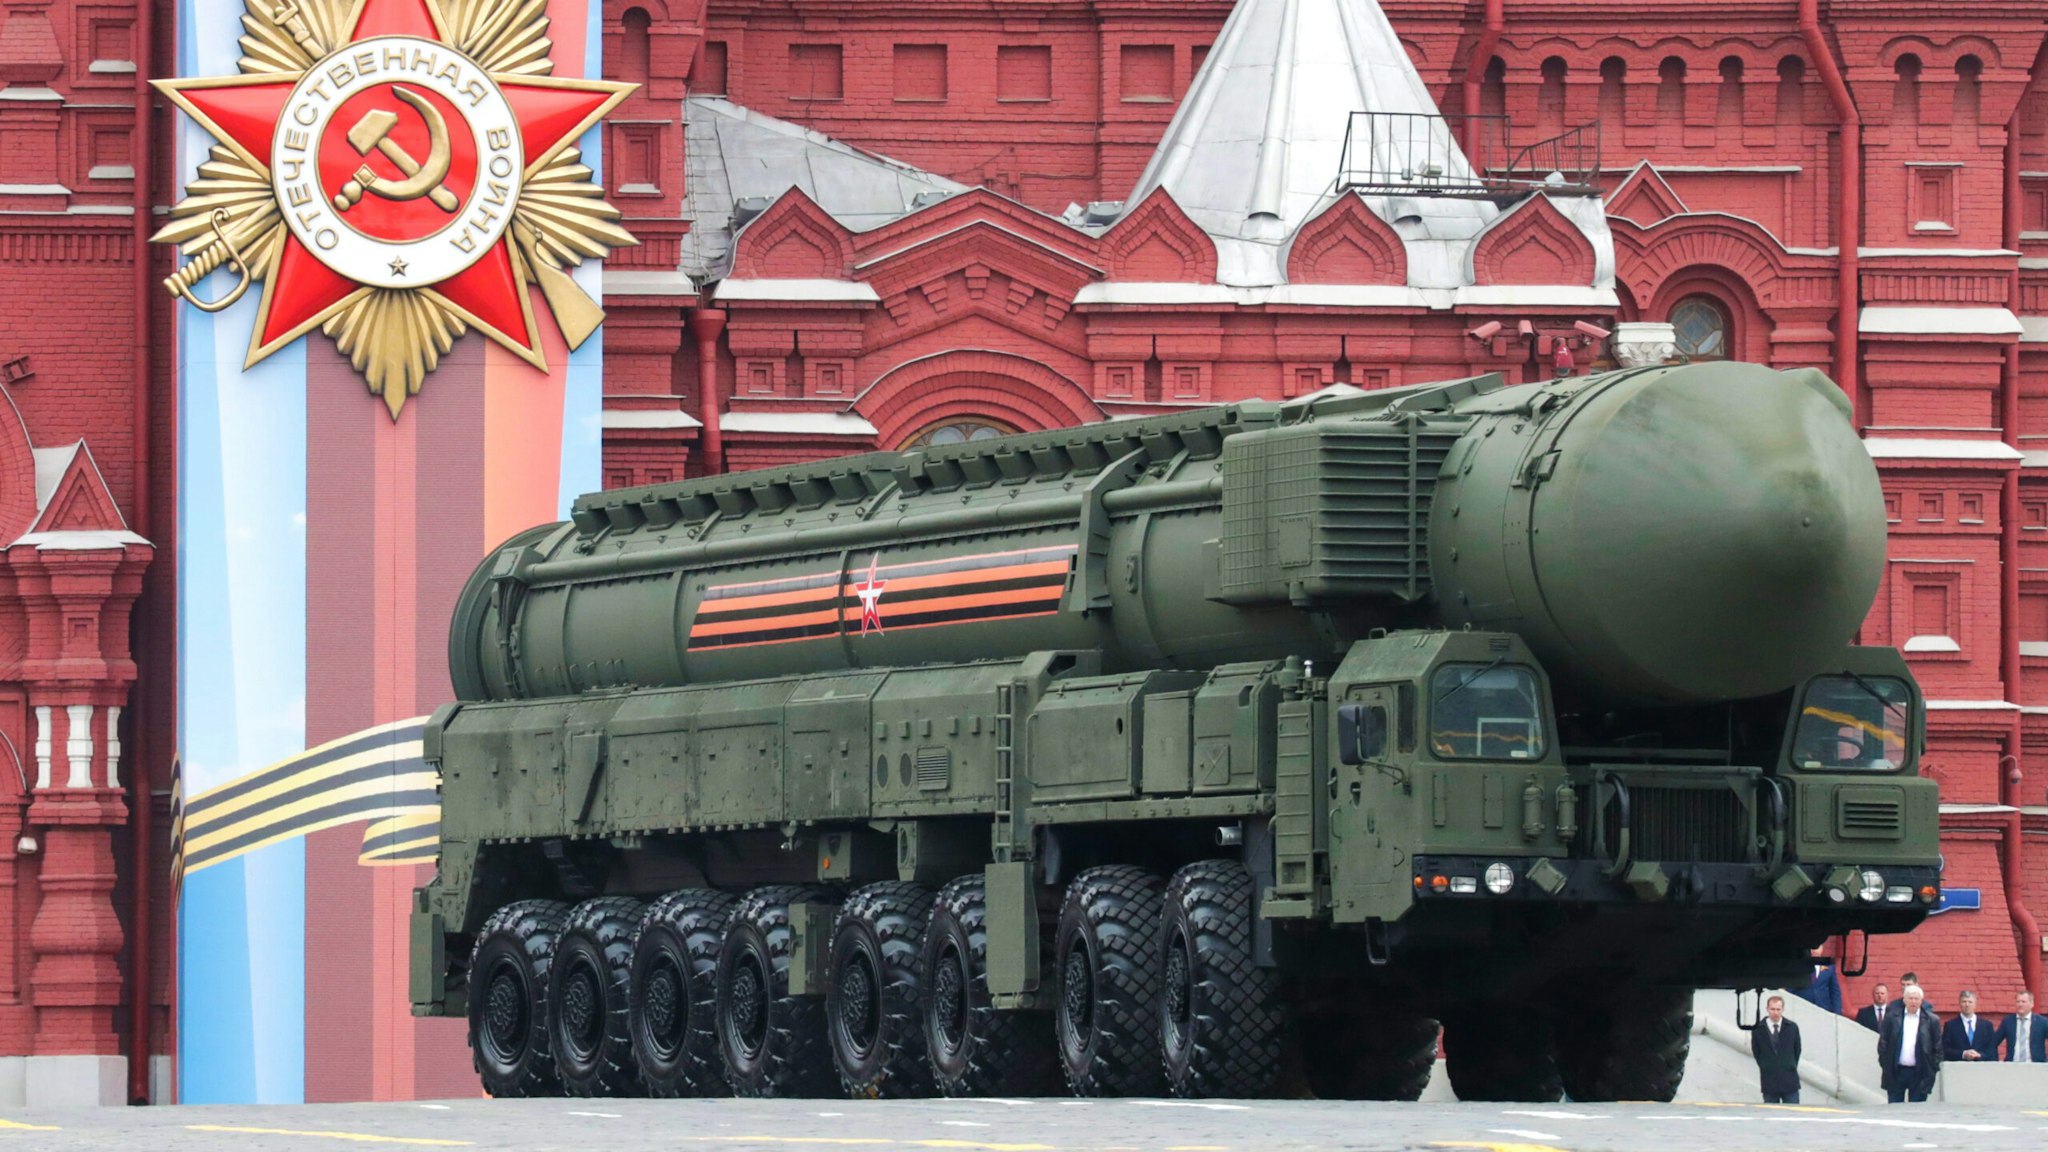 MOSCOW, RUSSIA MAY 9, 2019: A RS-24 Yars mobile intercontinental ballistic missile system rolls down Moscow's Red Square during the dress rehearsal of a Victory Day military parade marking the 74th anniversary of the victory over Nazi Germany in the 1941-1945 Great Patriotic War, the Eastern Front of World War II.